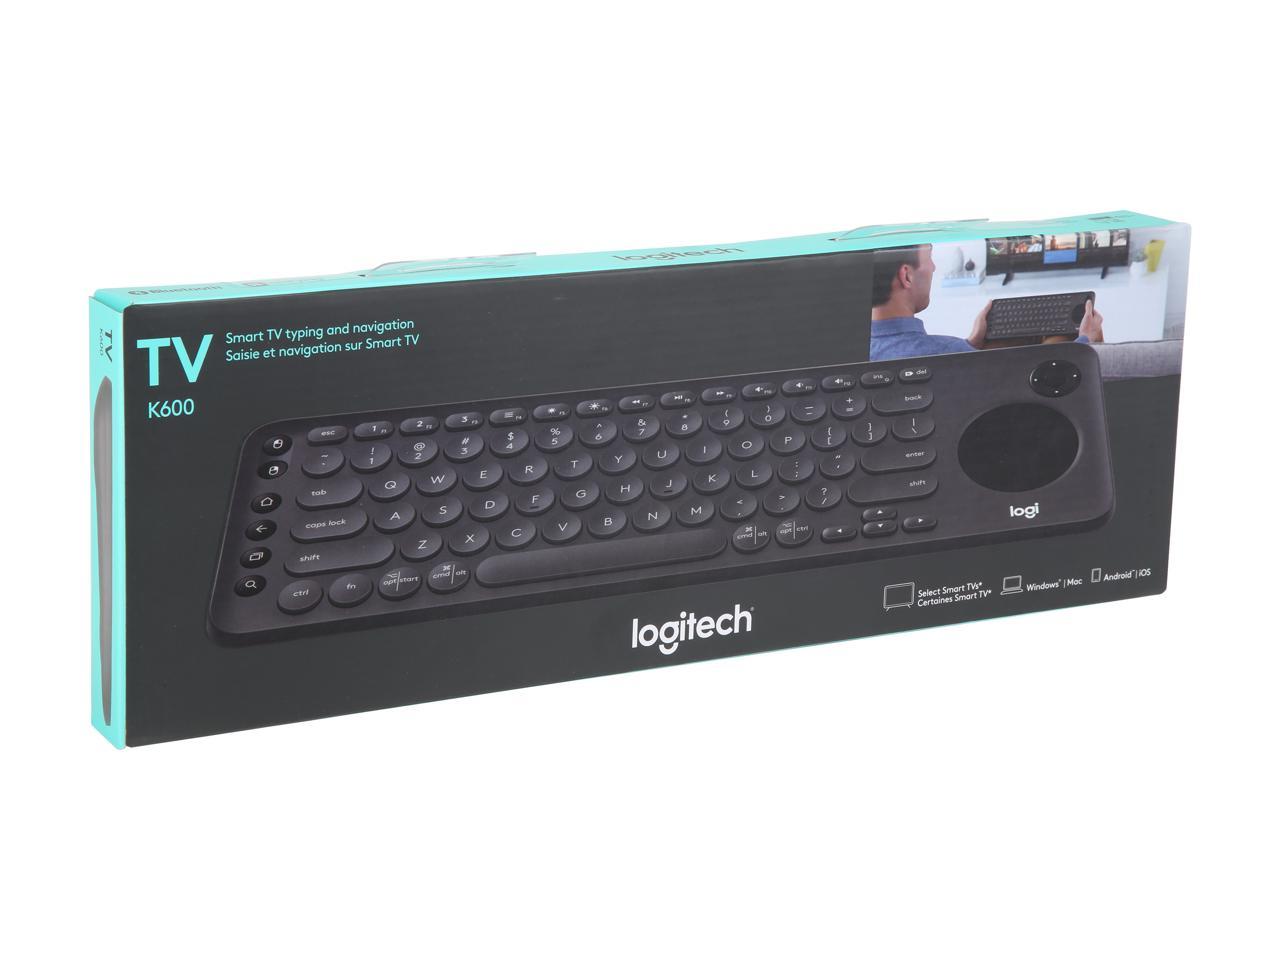 Logitech K600 TV TV Keyboard with Integrated Touchpad and D-Pad - 920-008822 - Newegg.com